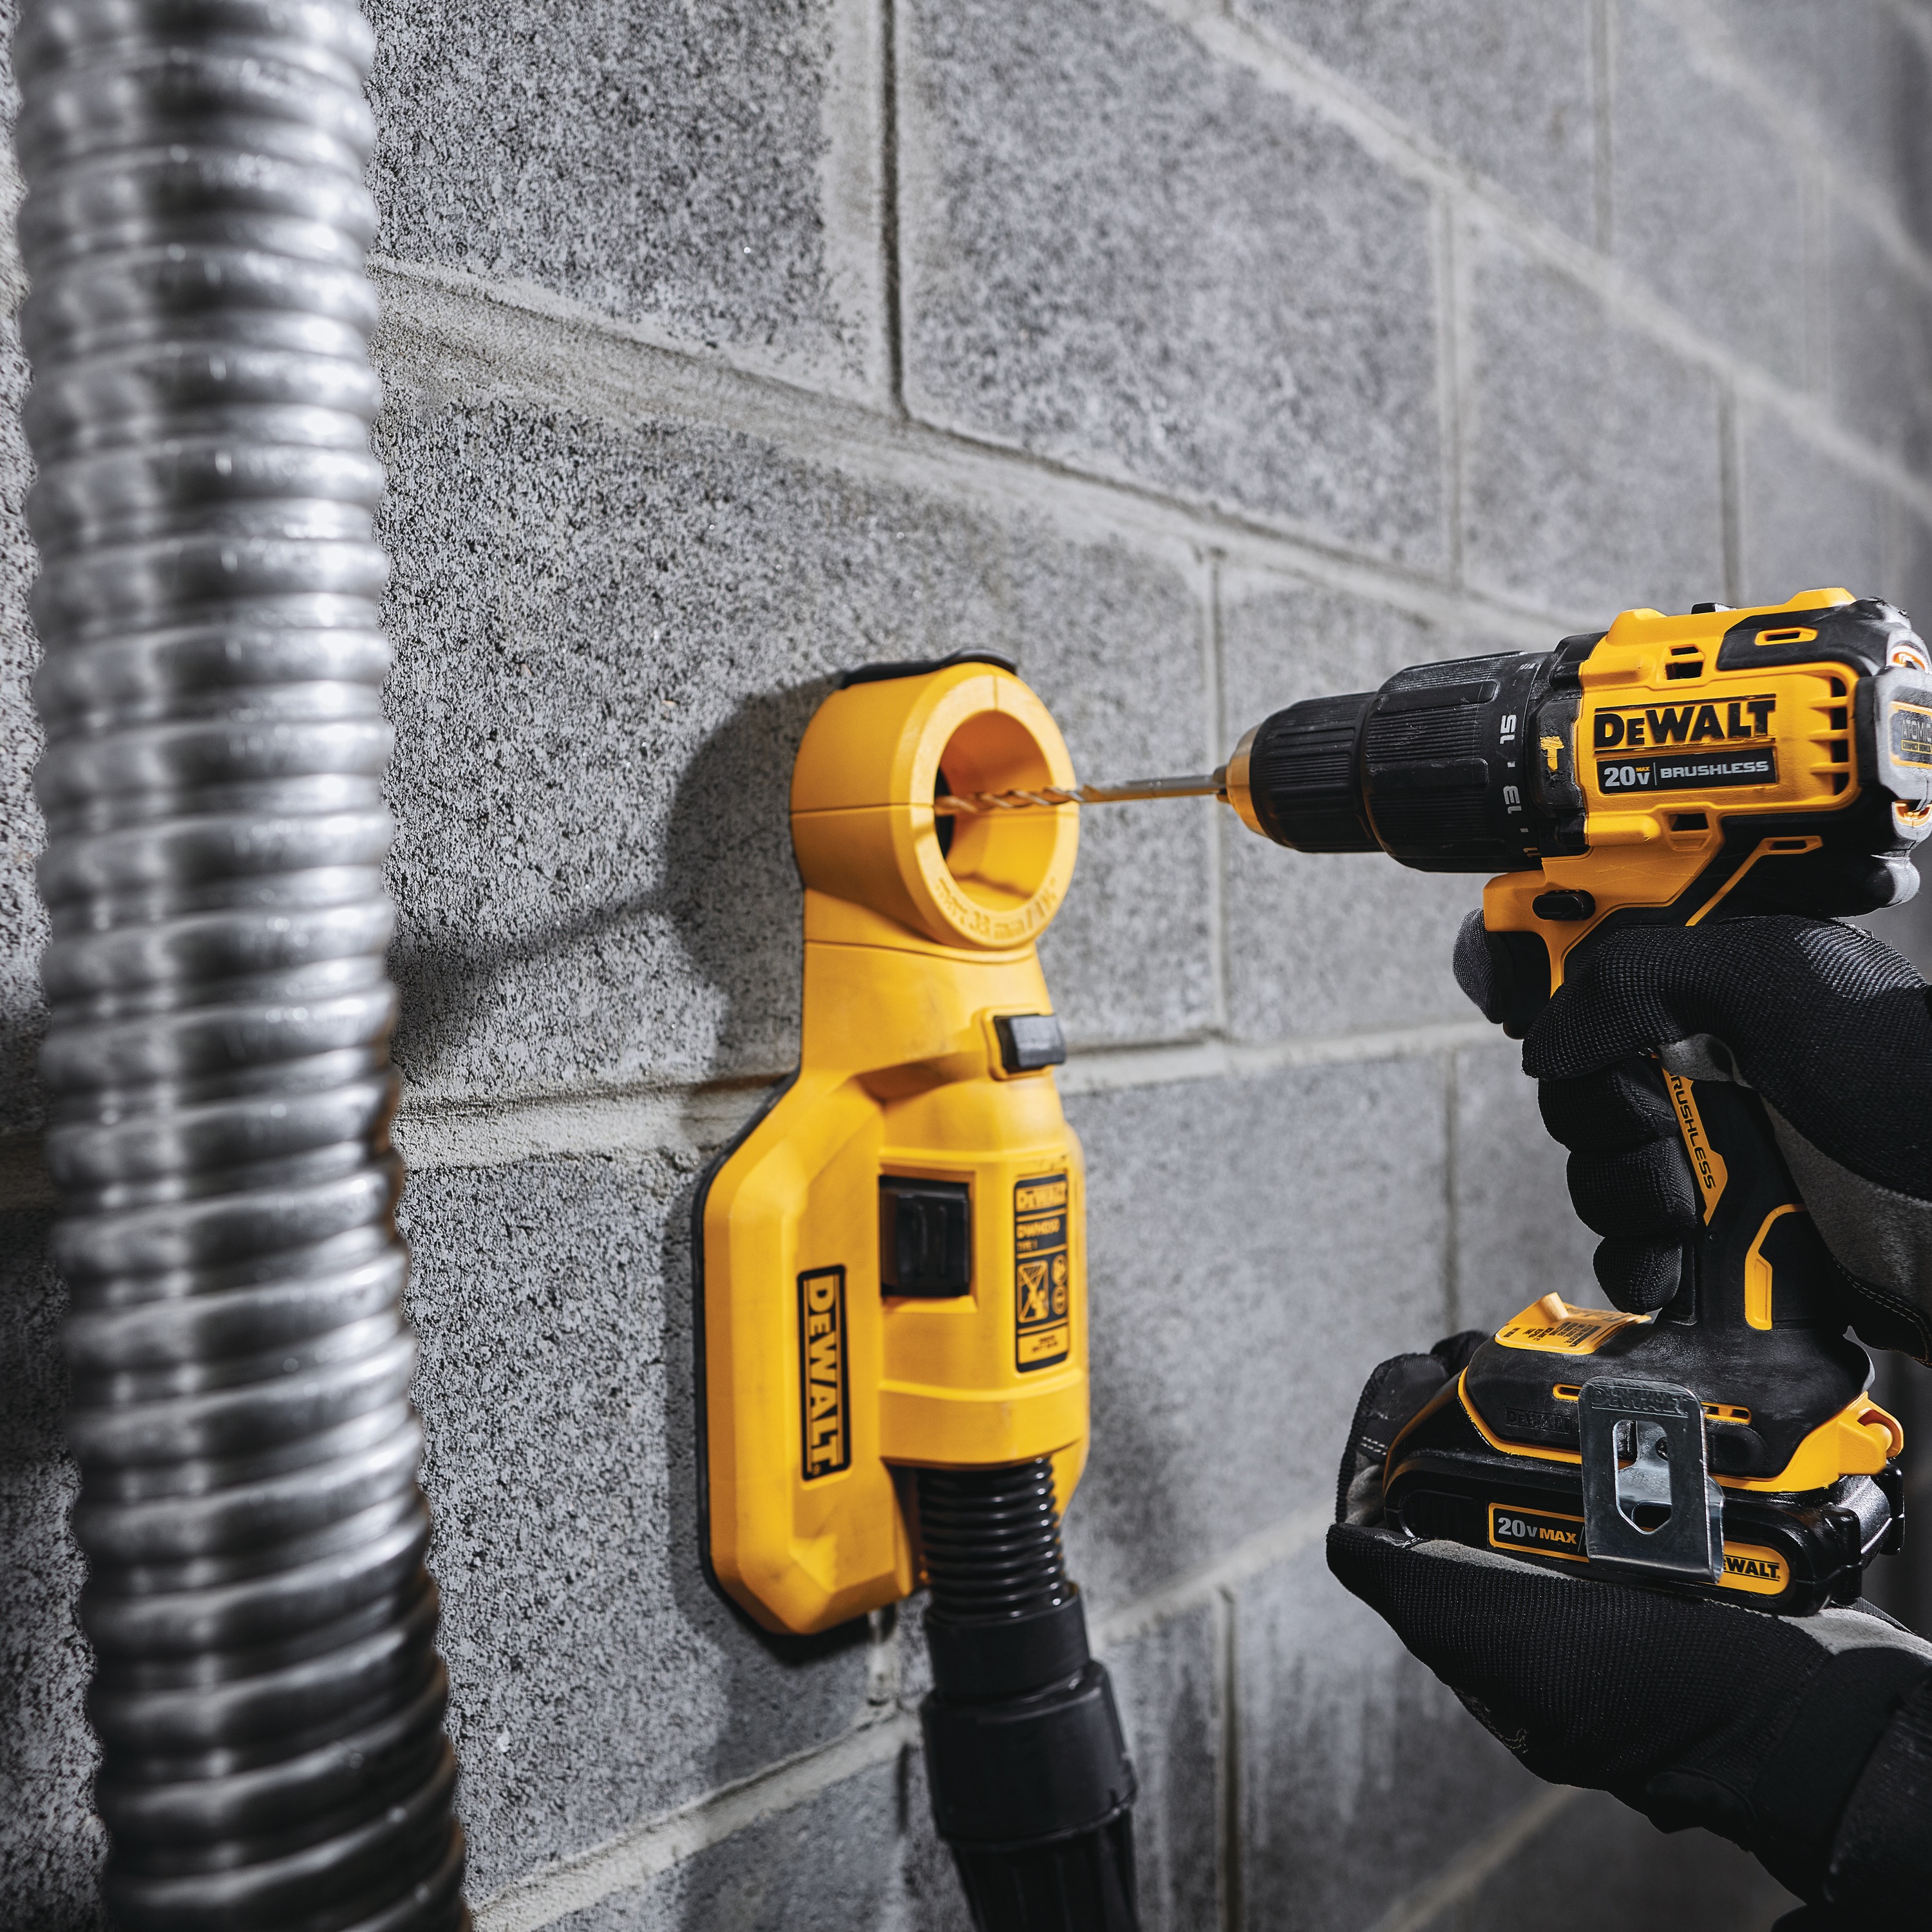 ATOMIC Brushless Compact Cordless half inch Hammer drill driver  drilling on  work surface.